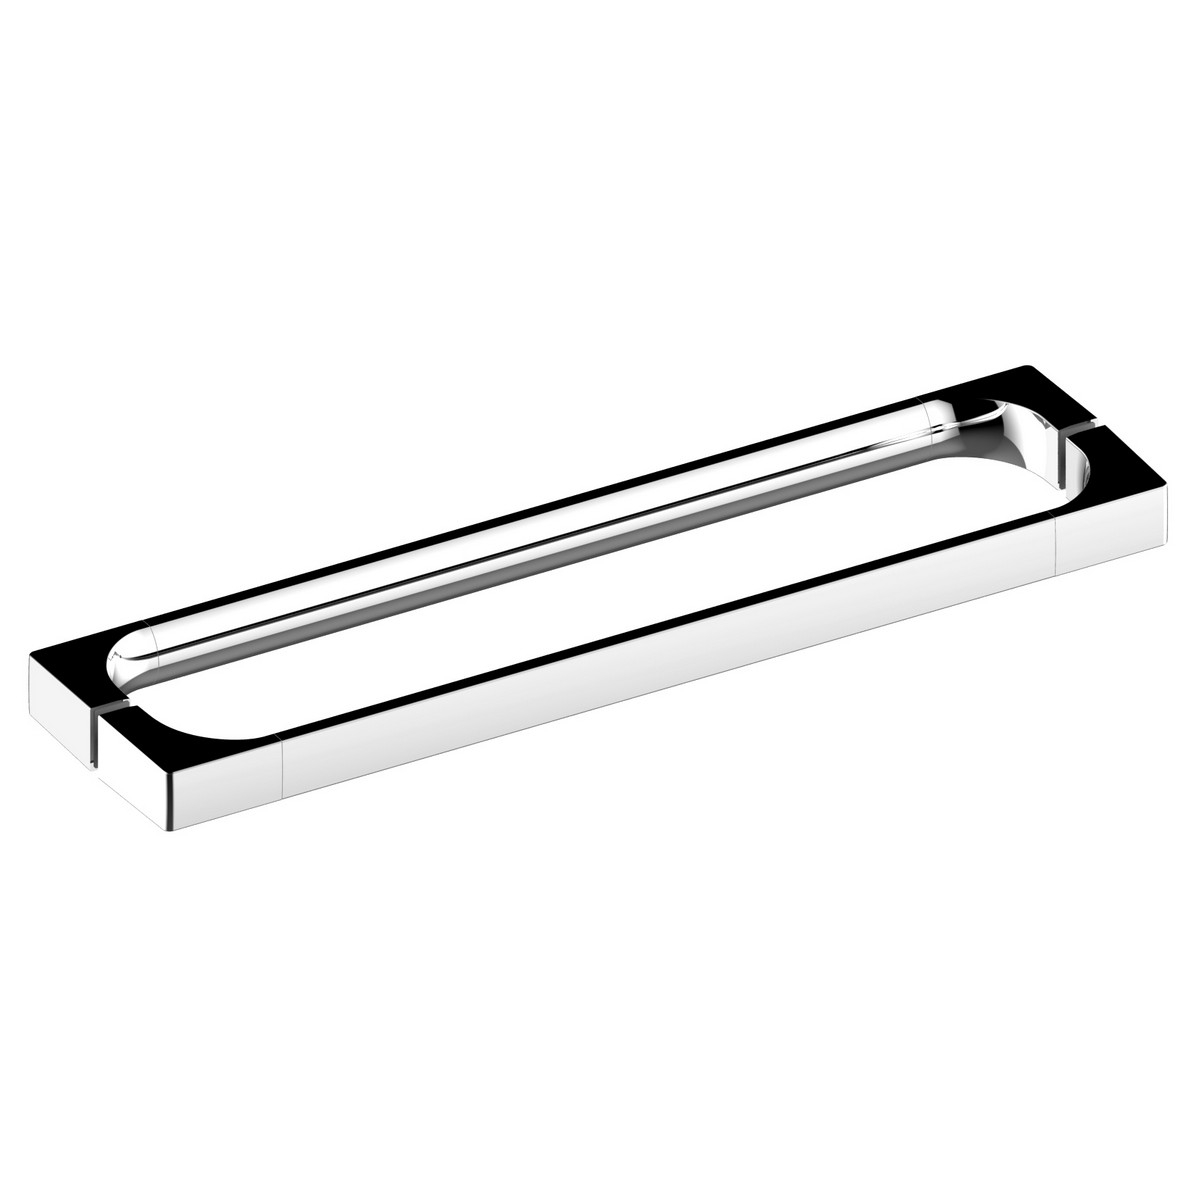 KEUCO 11108010503 EDITION 11 20 1/2 INCH DOUBLE SHOWER DOOR HANDLE IN POLISHED CHROME